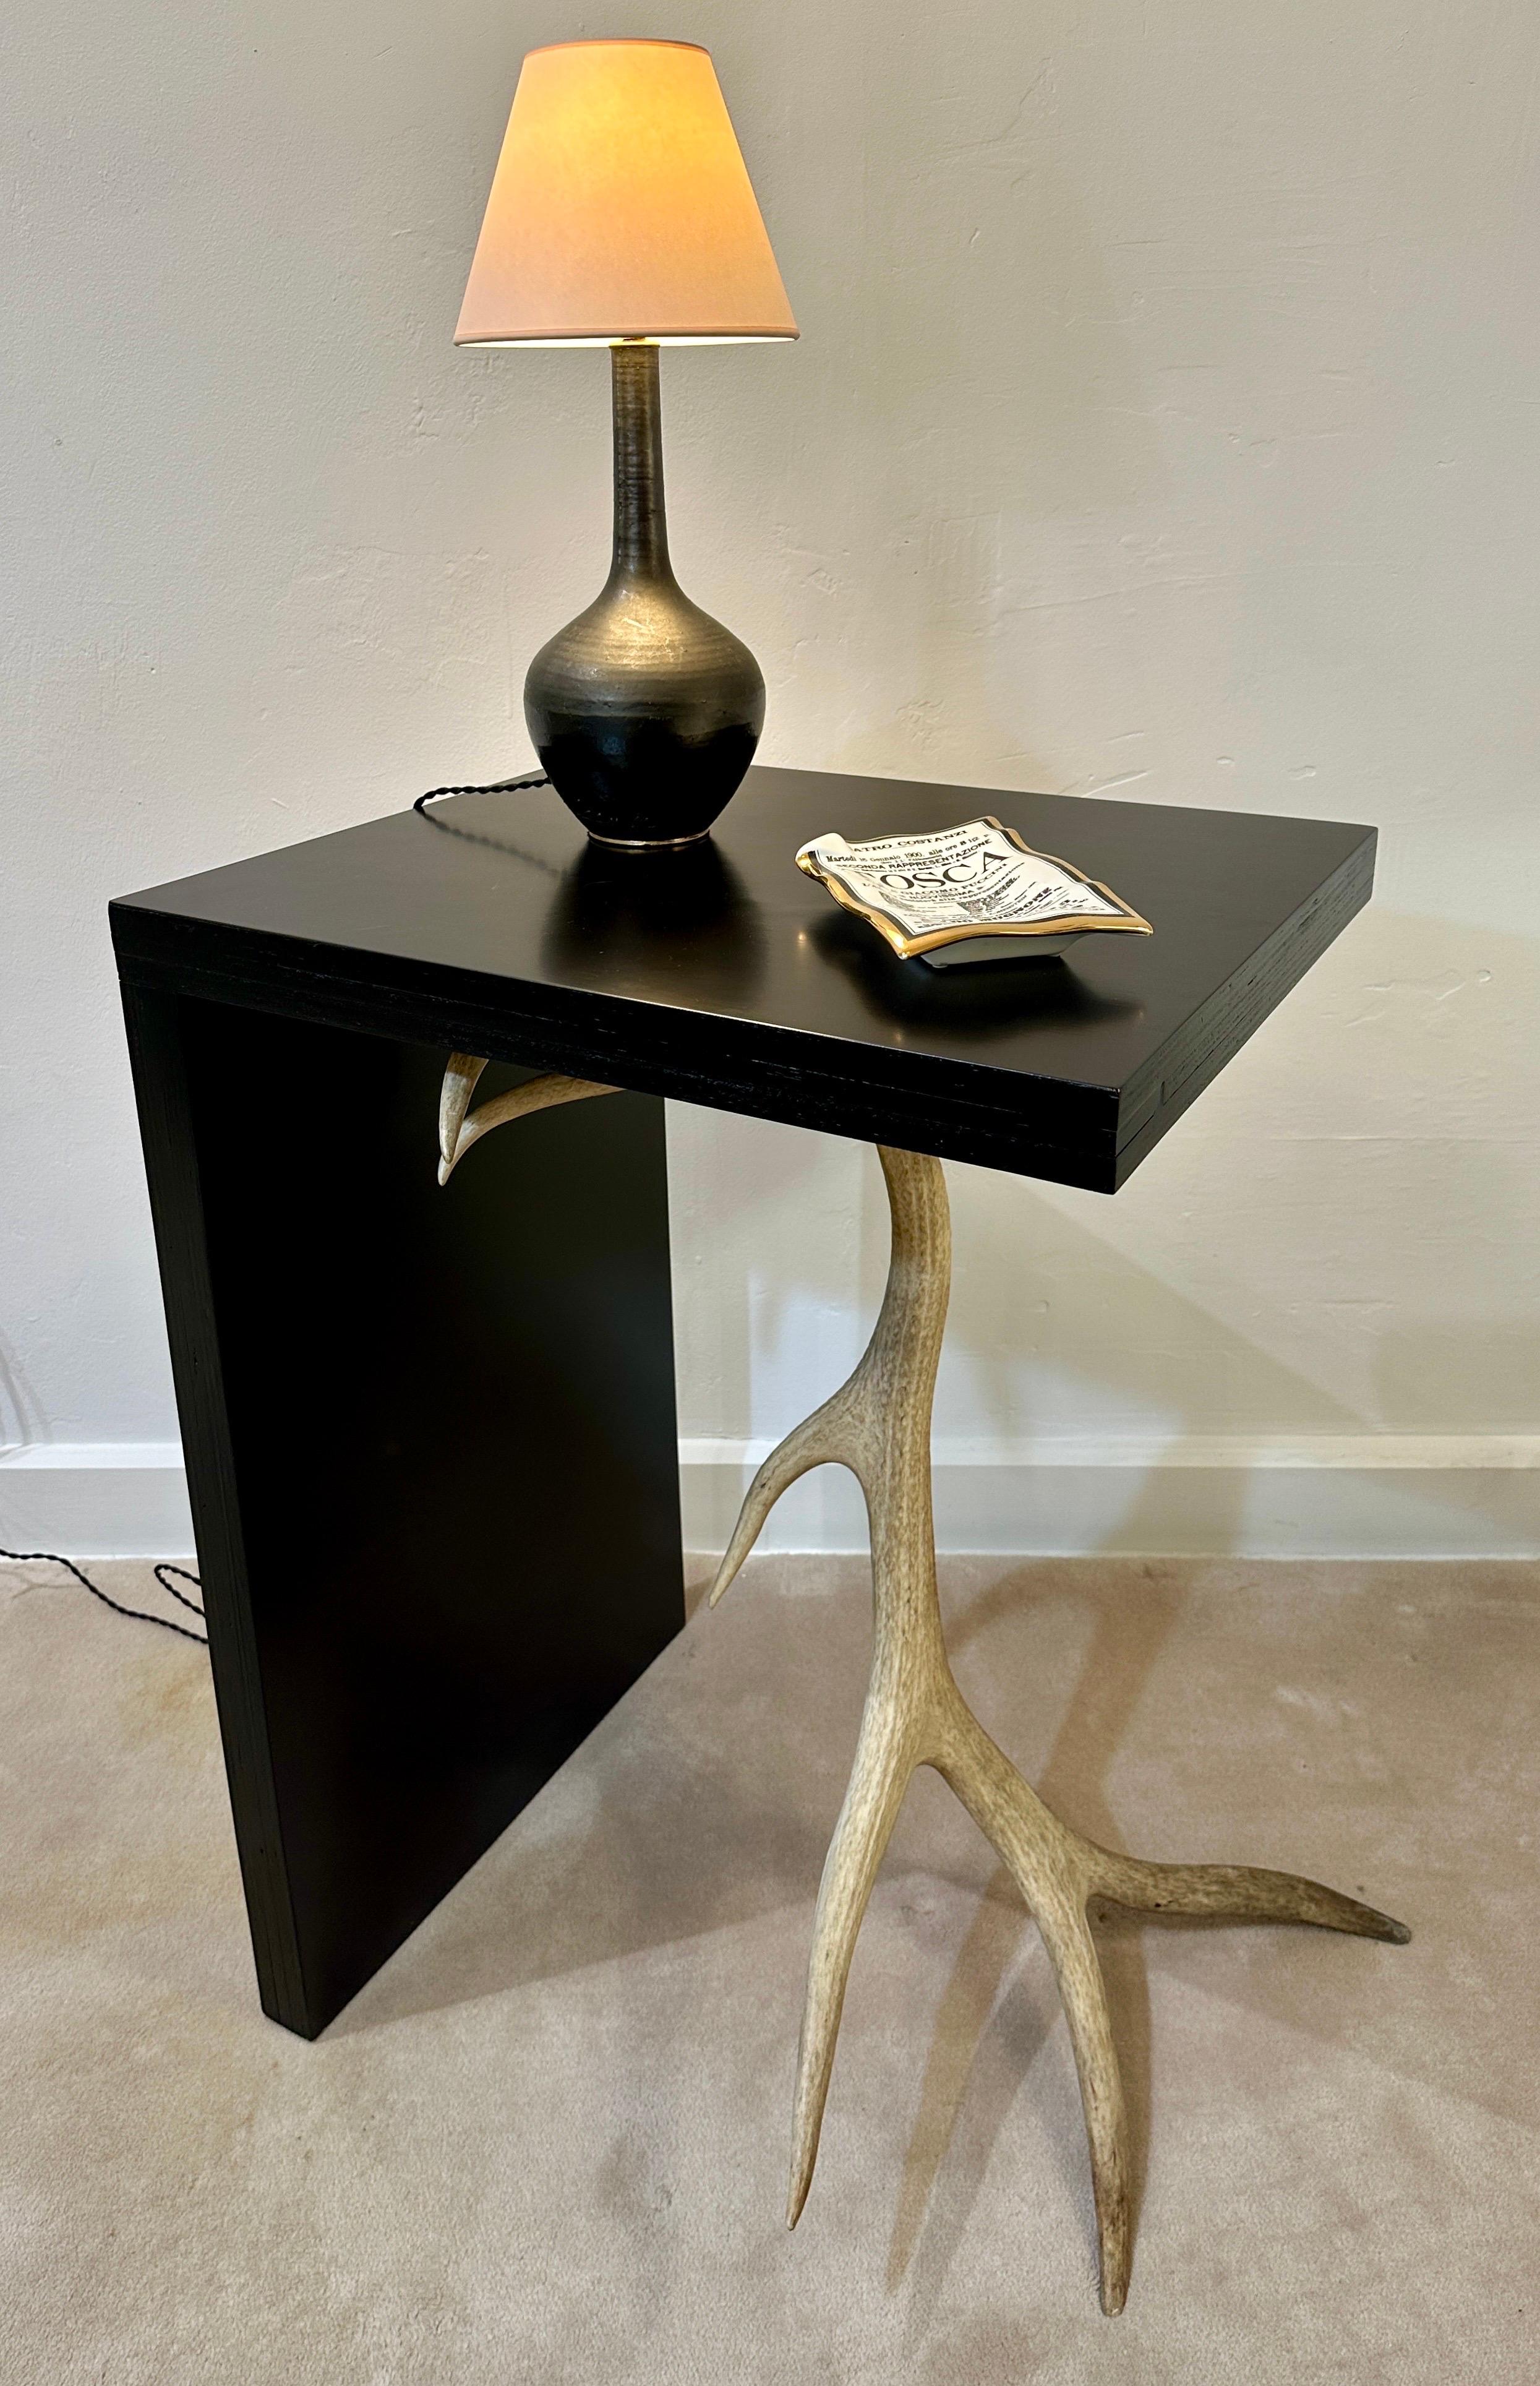 This whimsical original custom table in 